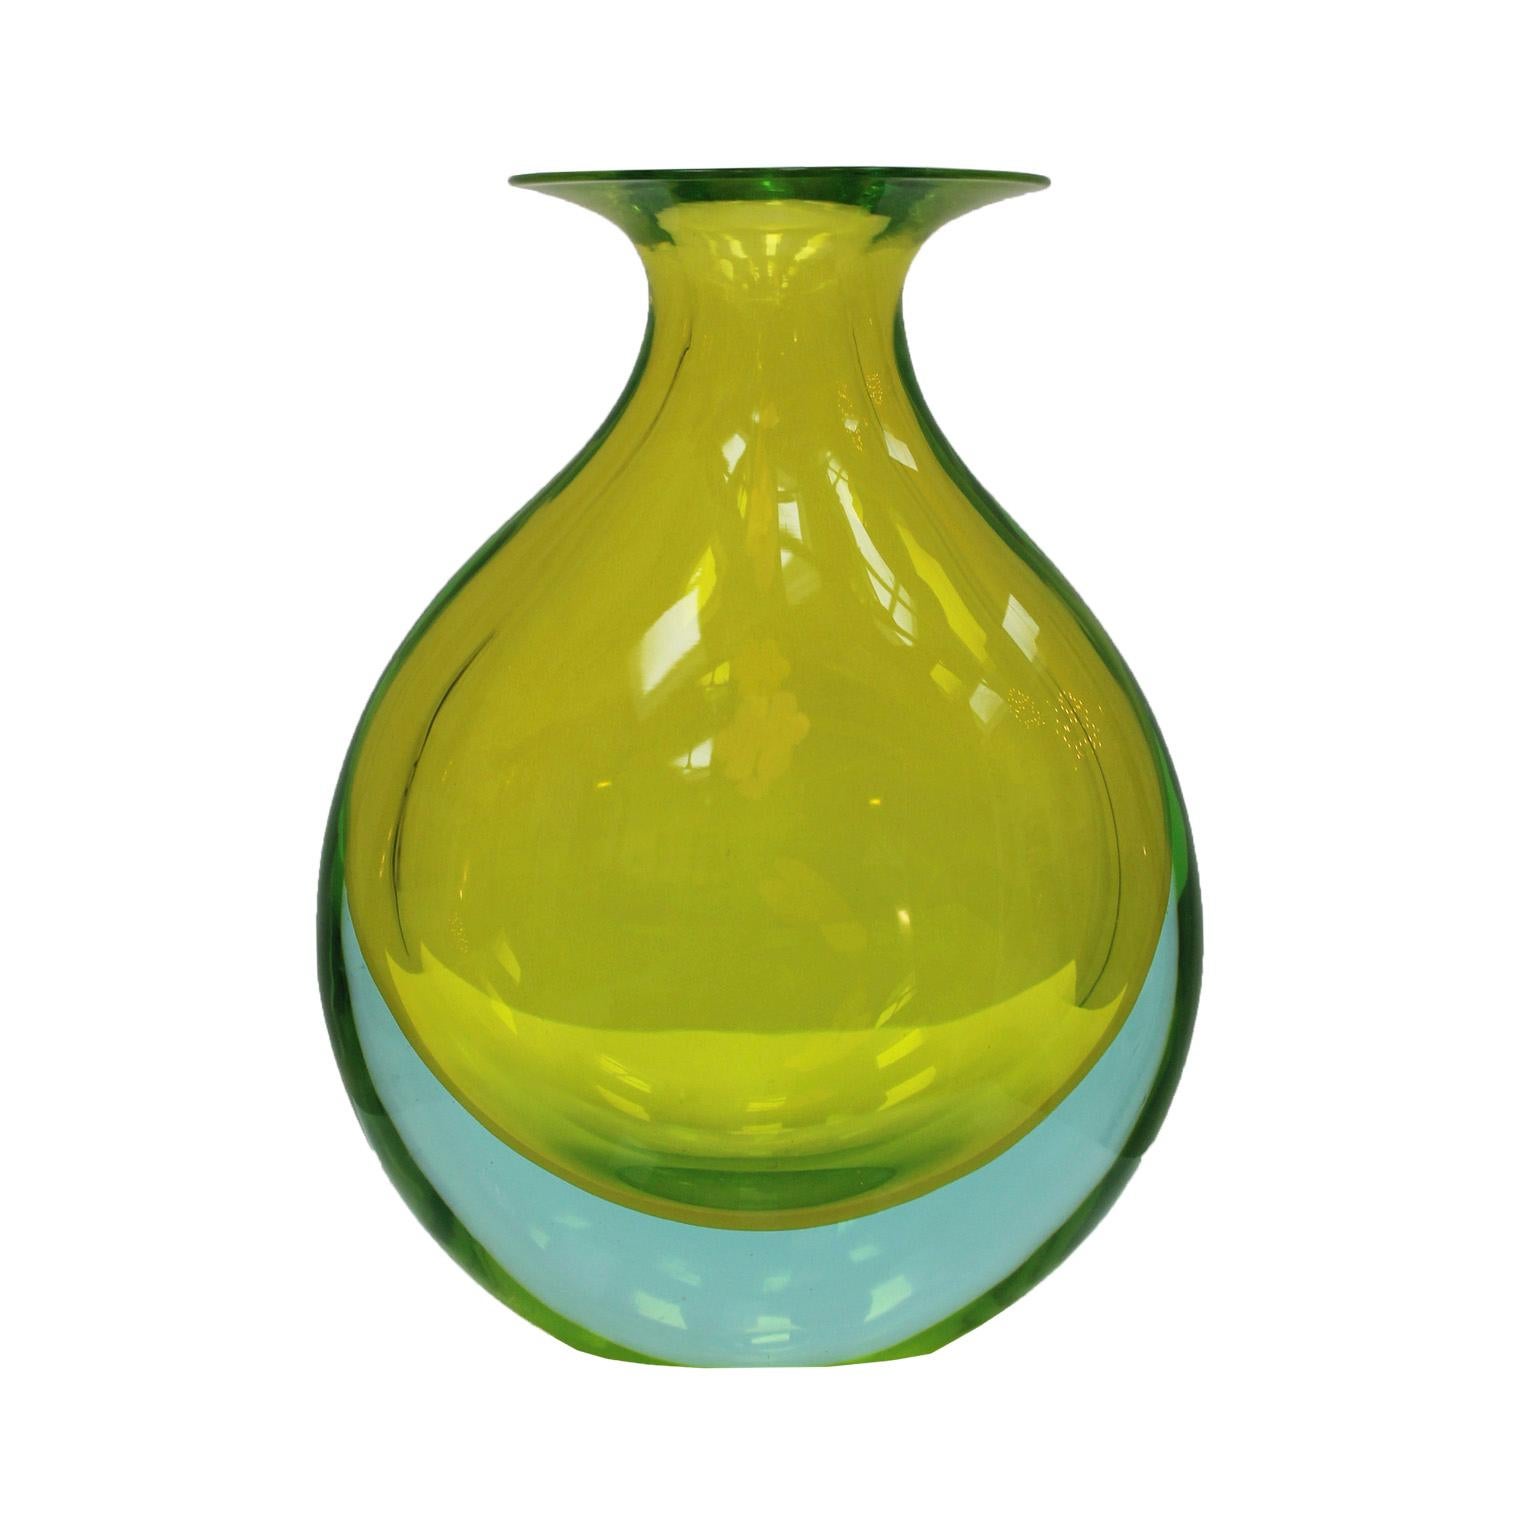 Mid-century Modern Glass vase. Attributed to Flavio Poli for Seguso. Italy, 50s.
In sommerso glass, the yellow body is submerged in a light blue mass. (Color variant Giallo - Blu)

Every item LA Studio offers is checked by our team of 10 craftsmen